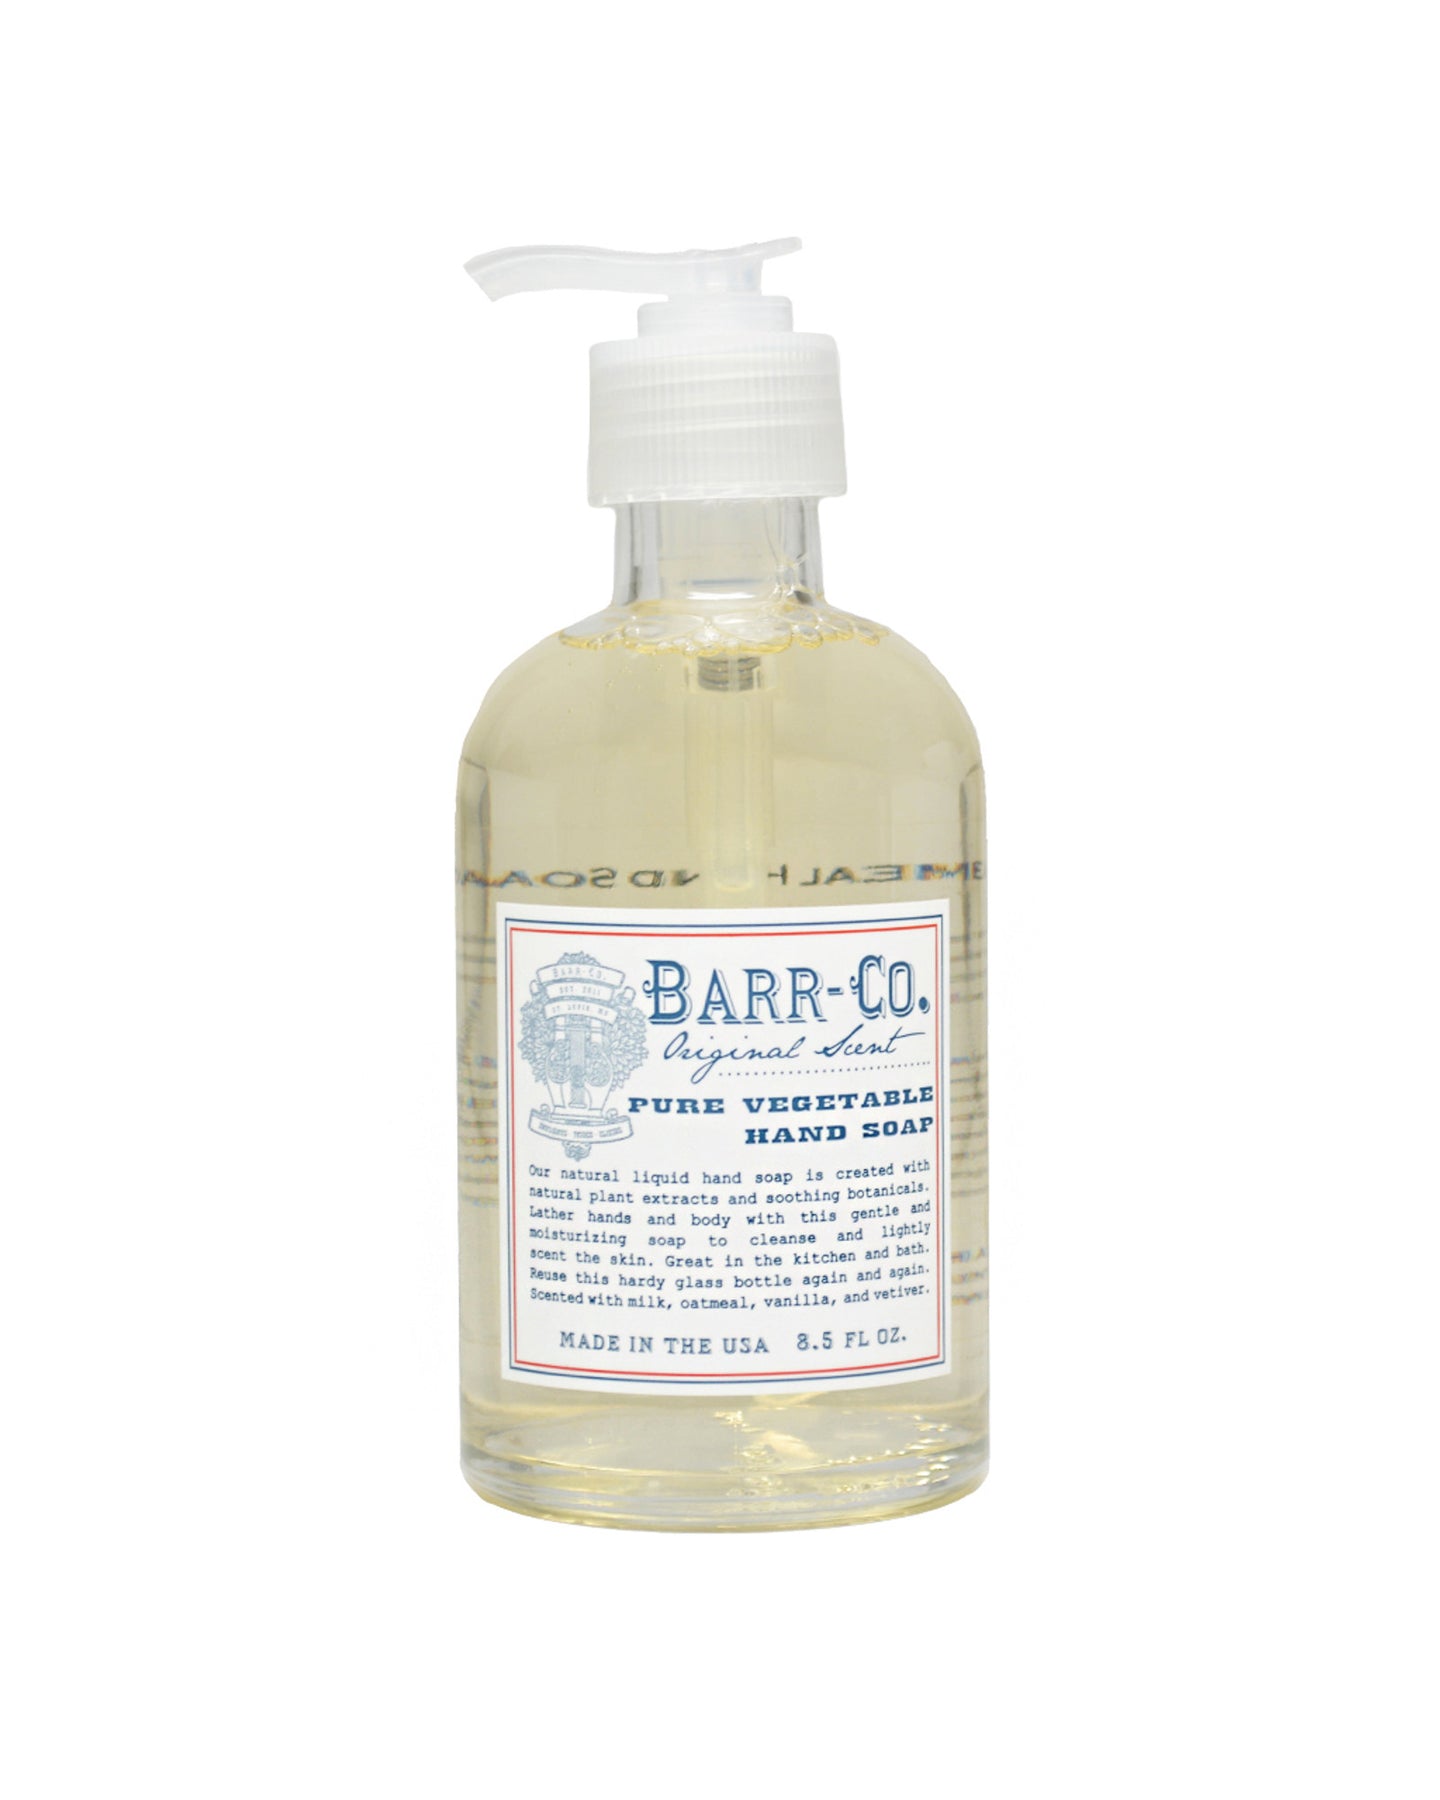 Barr-Co. Hand Soap